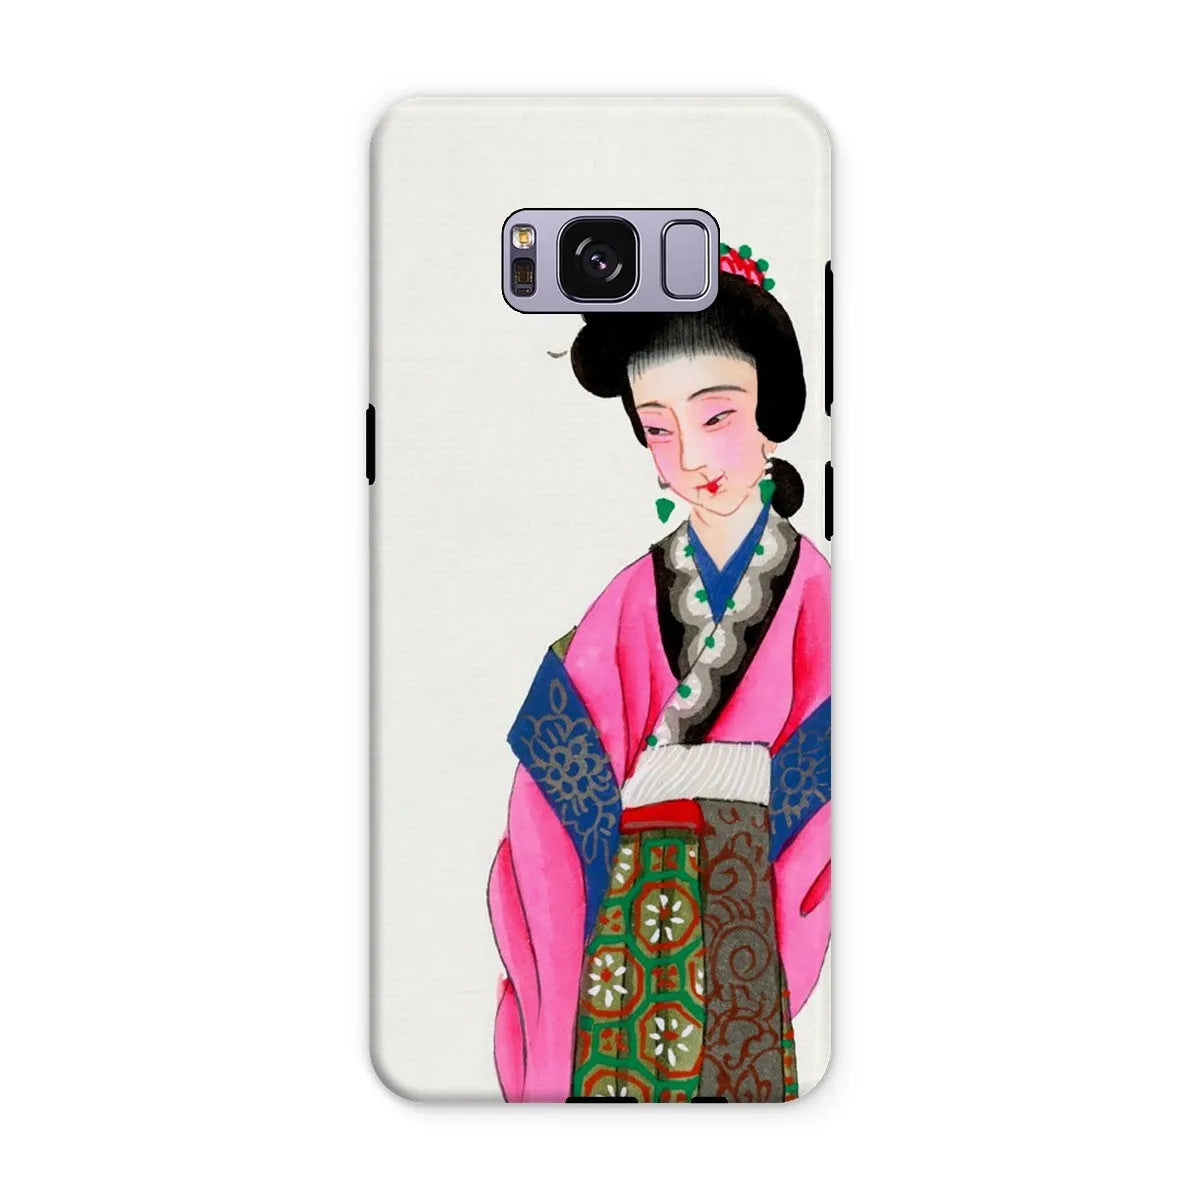 Noblewoman - Chinese Aesthetic Manchu Art Phone Case - Samsung Galaxy S8 Plus / Matte - Mobile Phone Cases - Aesthetic